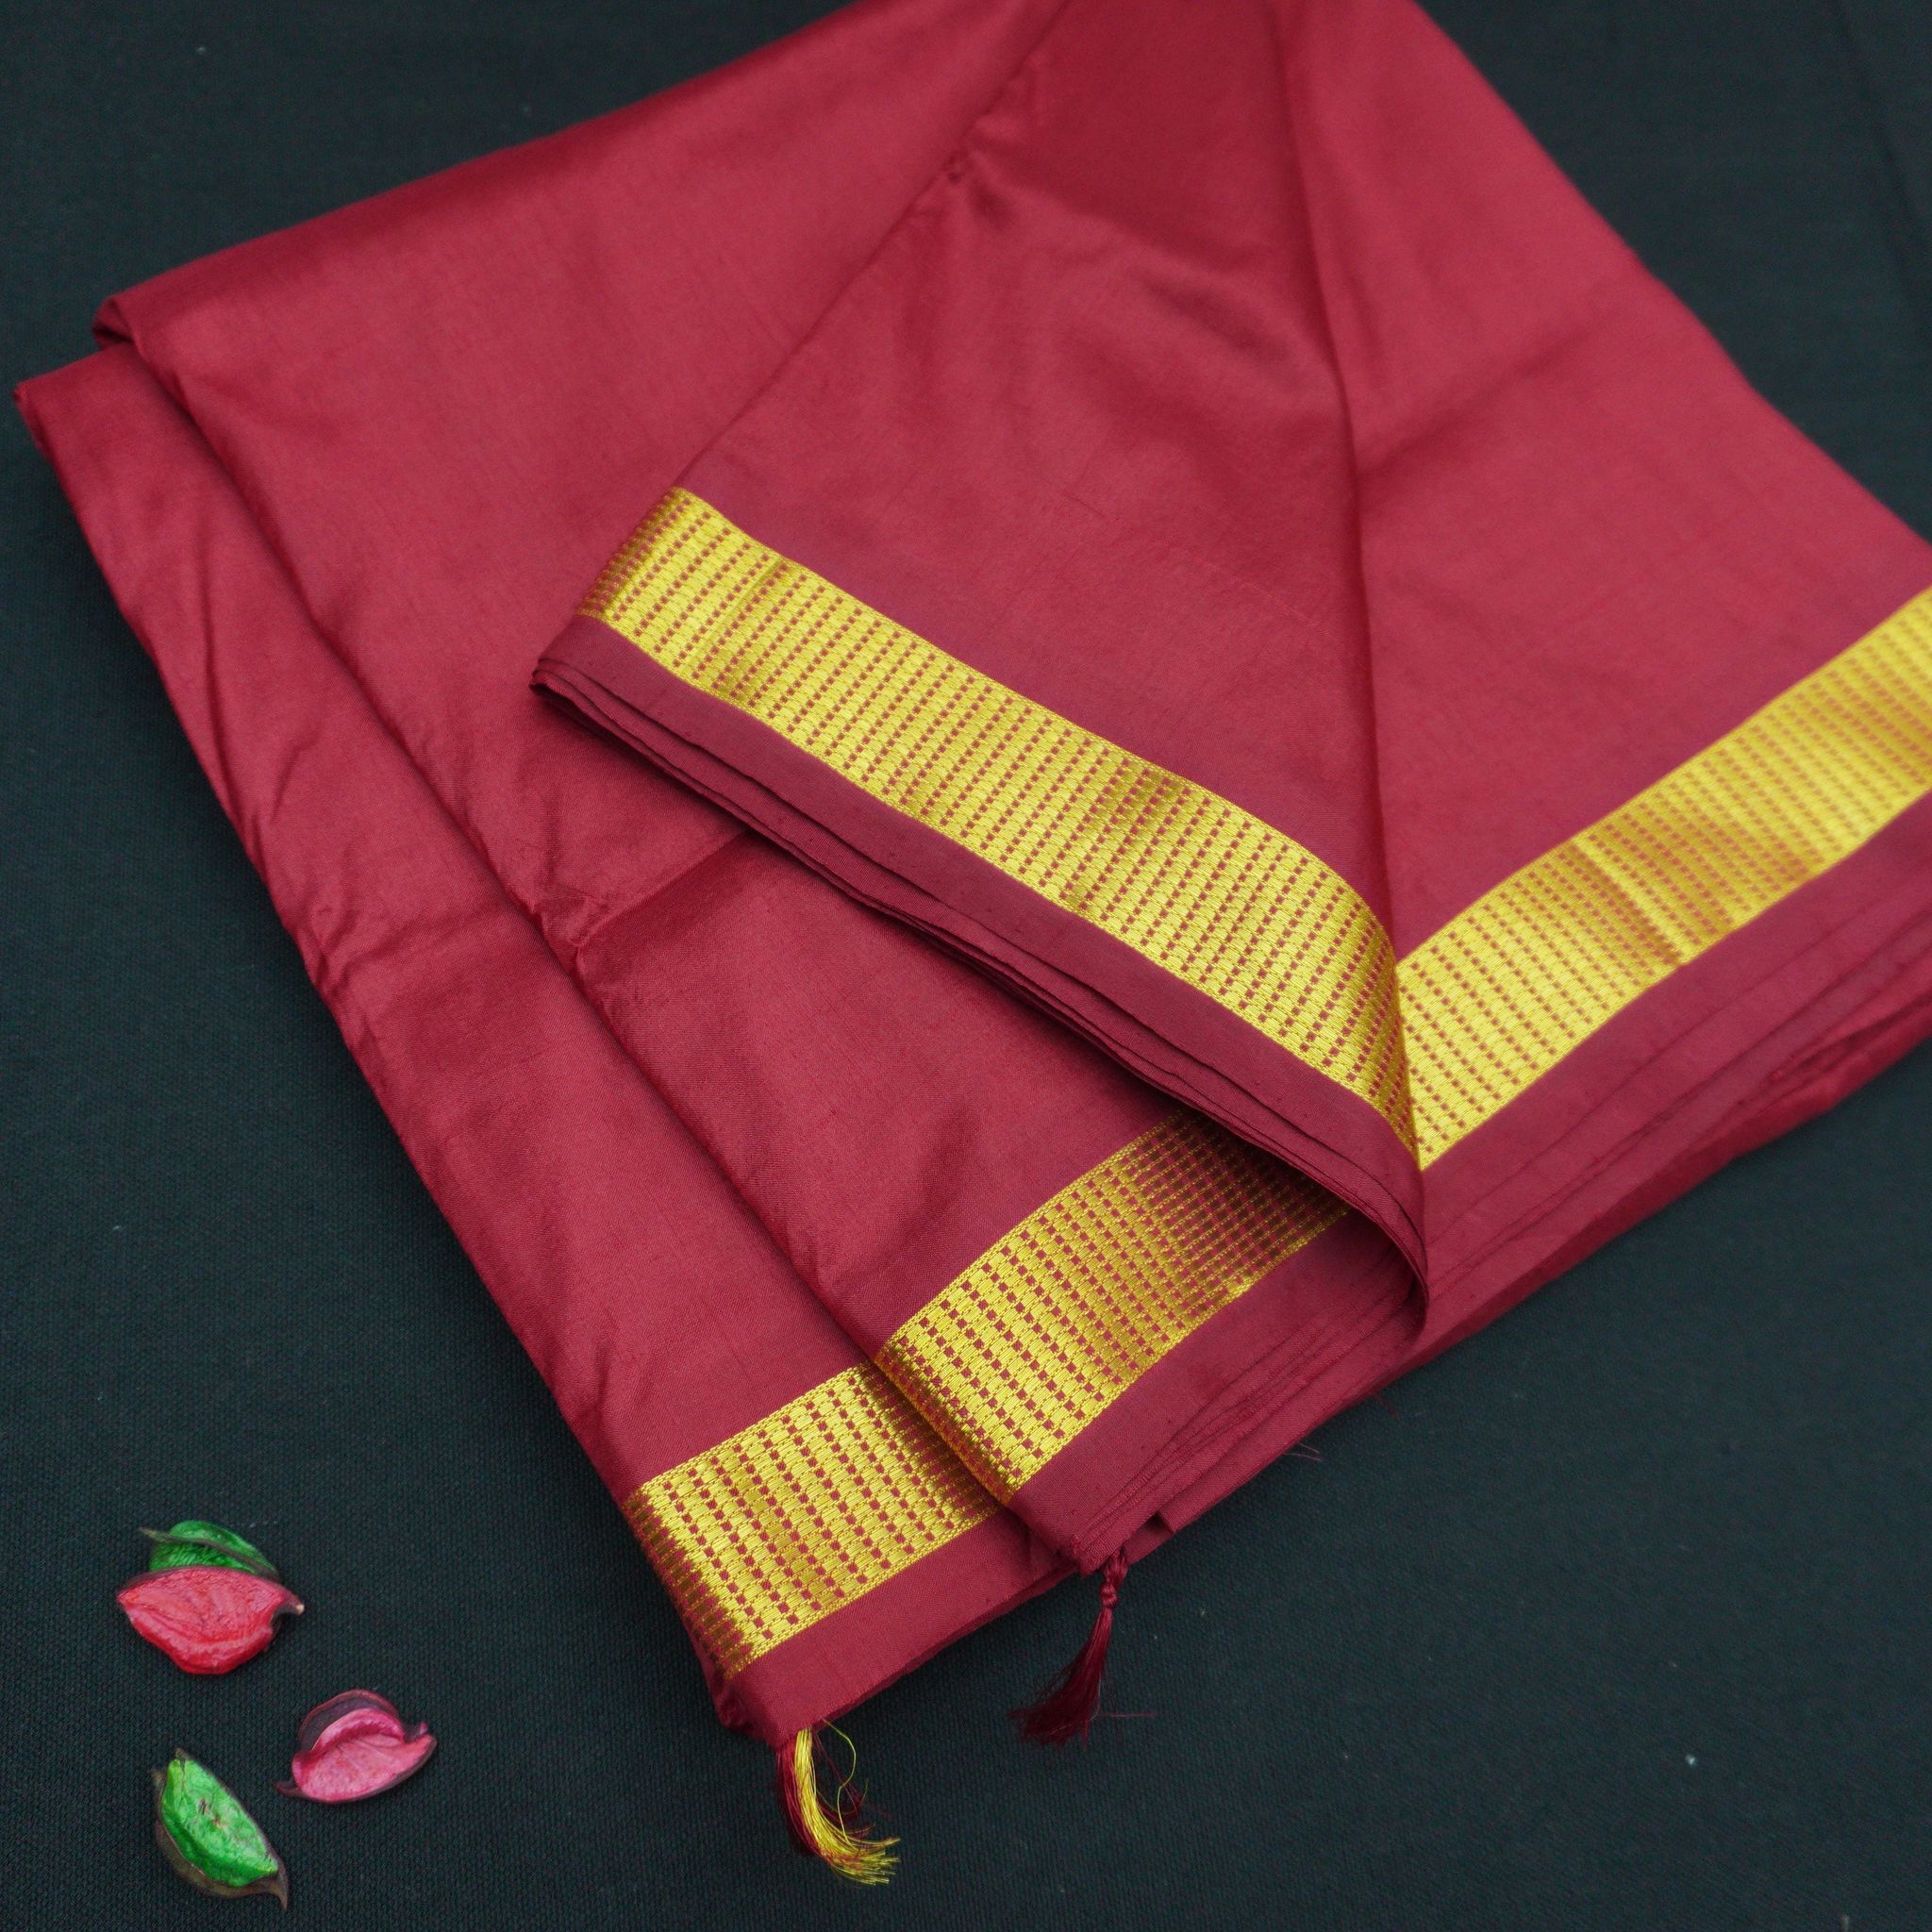 Draping Saree Projects :: Photos, videos, logos, illustrations and branding  :: Behance